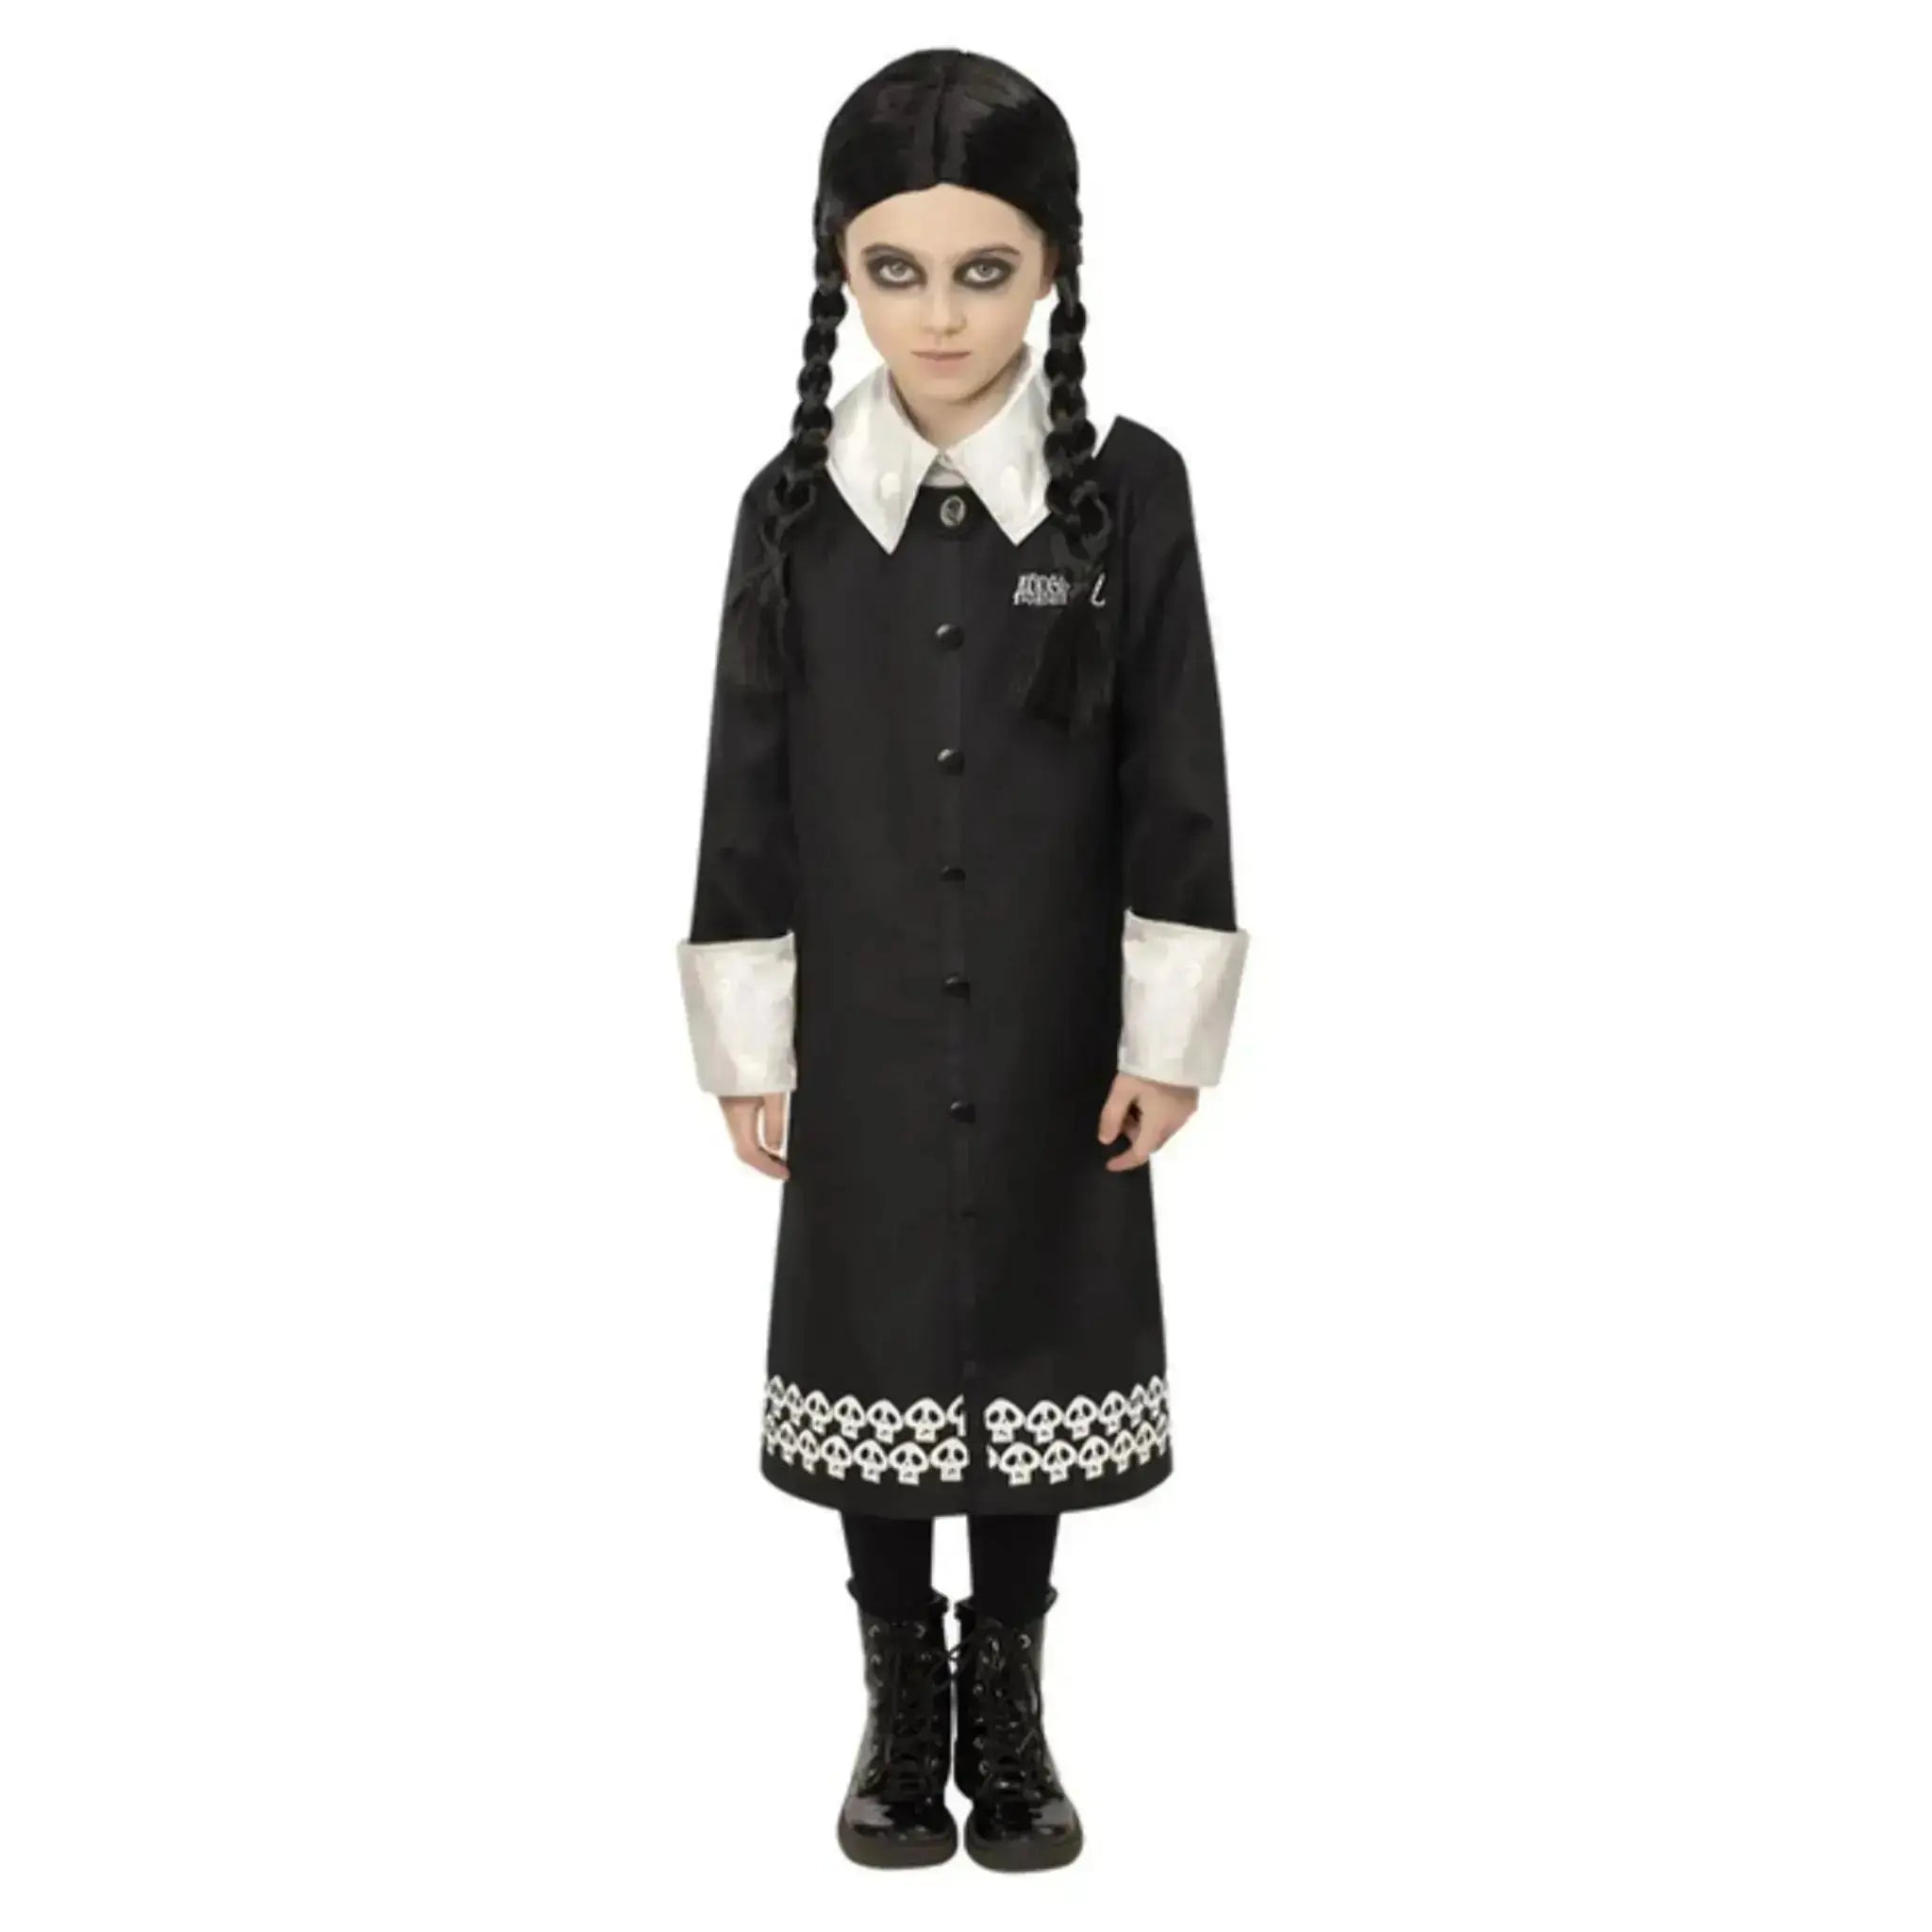 Addam's Family - Wednesday Child's Costume | The Party Hut